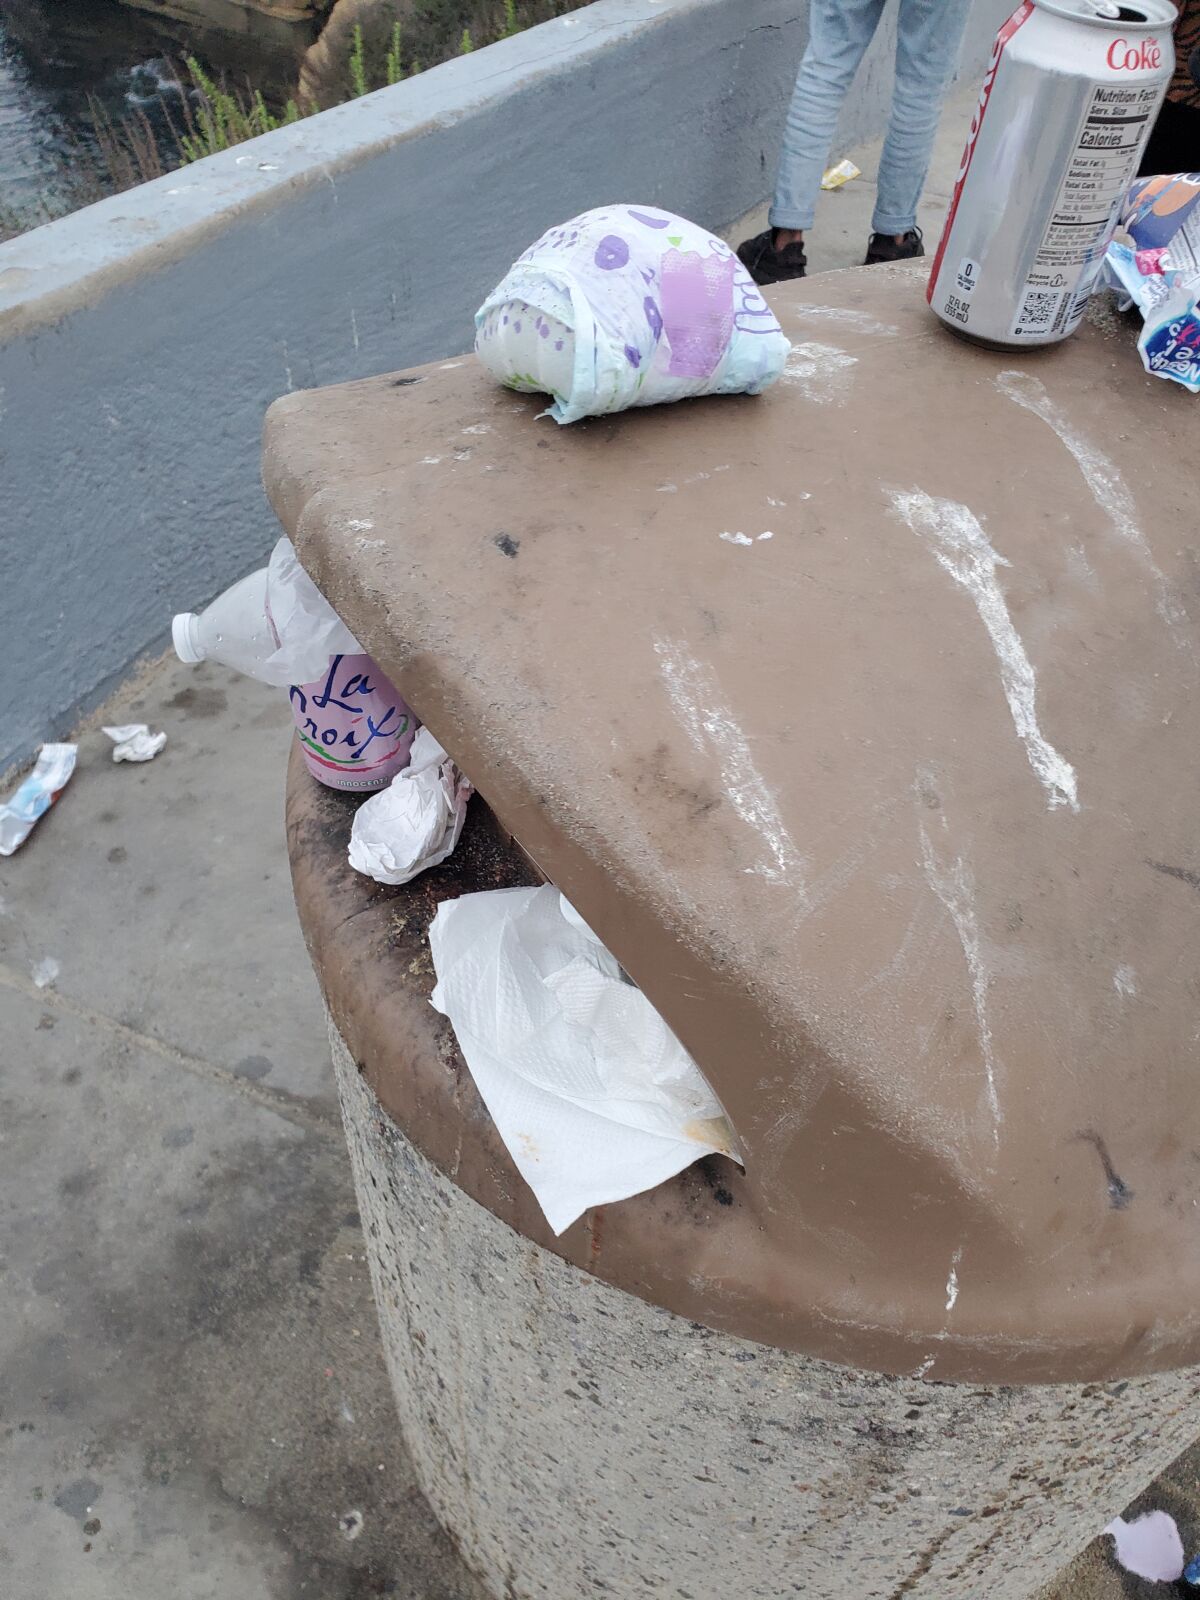 A trash can near the coast overflows with garbage in La Jolla.